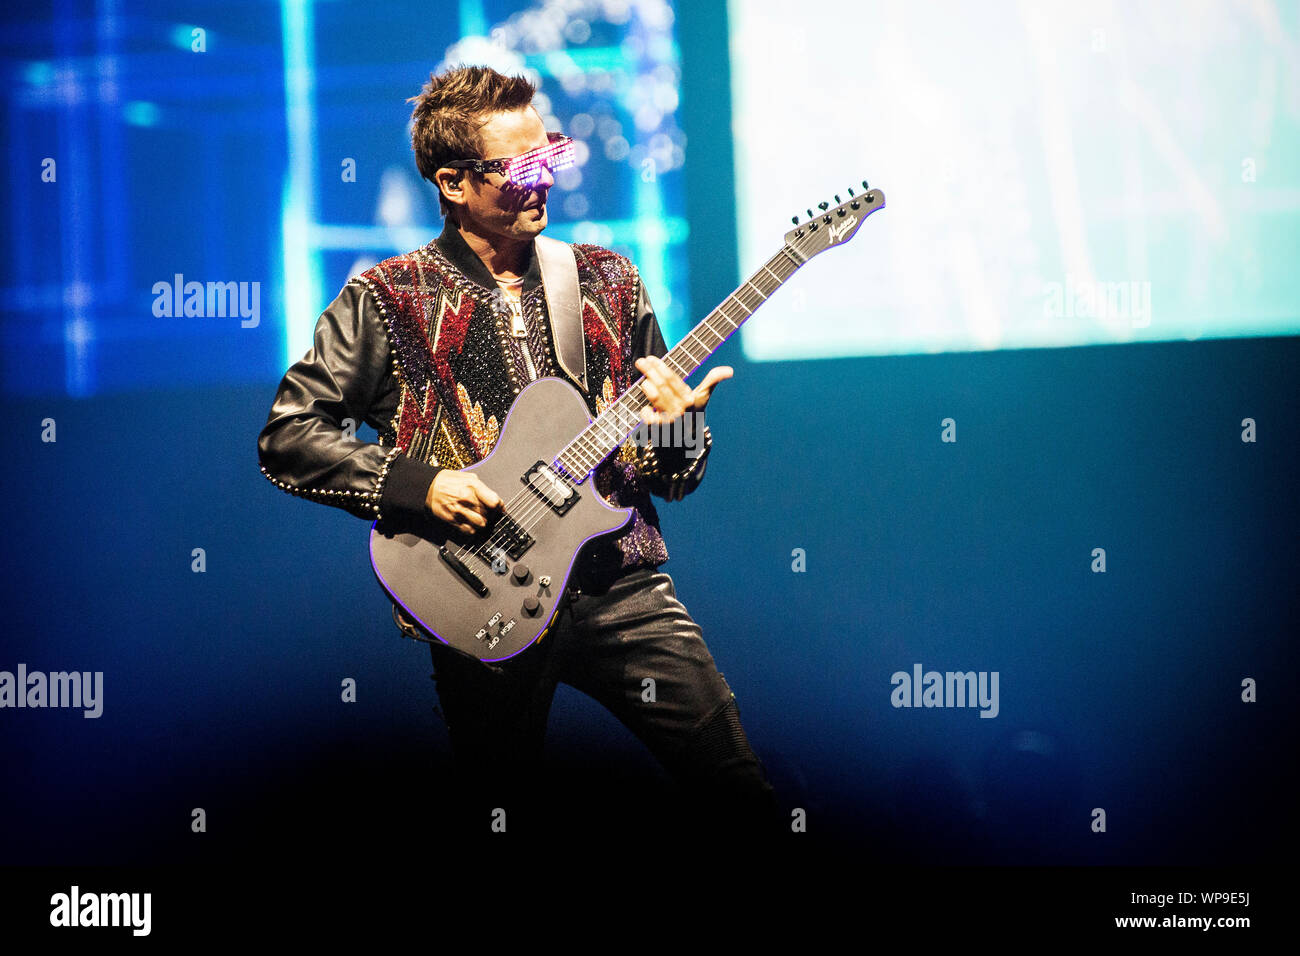 Oslo, Norway. 7th, September 2019. The English rock band Muse performs a live concert at Telenor Arena in Oslo. Here singer, songwriter and musician Matthew Bellamy is seen live on stage. (Photo credit: Gonzales Photo - Terje Dokken). Stock Photo